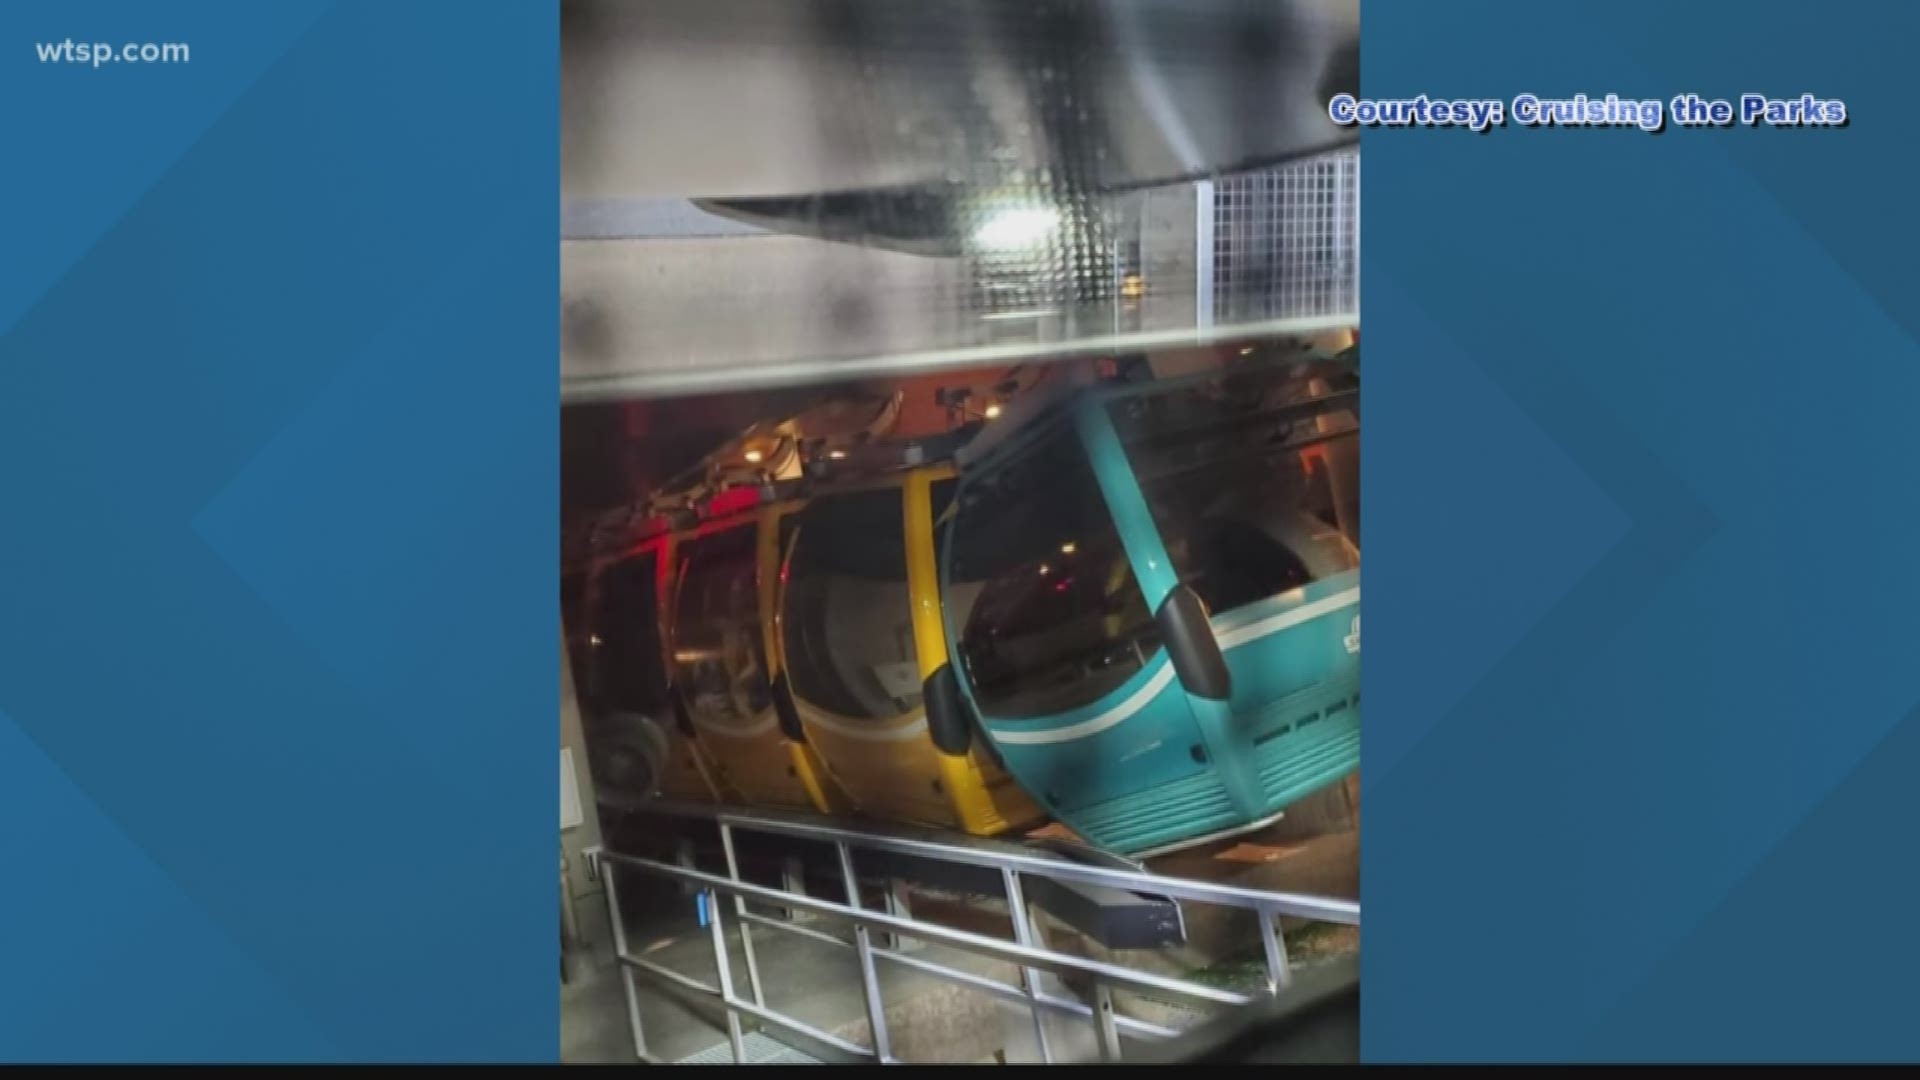 Firefighters have responded to help Walt Disney World park-goers who have been stuck aboard the Florida resort's newly launched aerial cable car system.